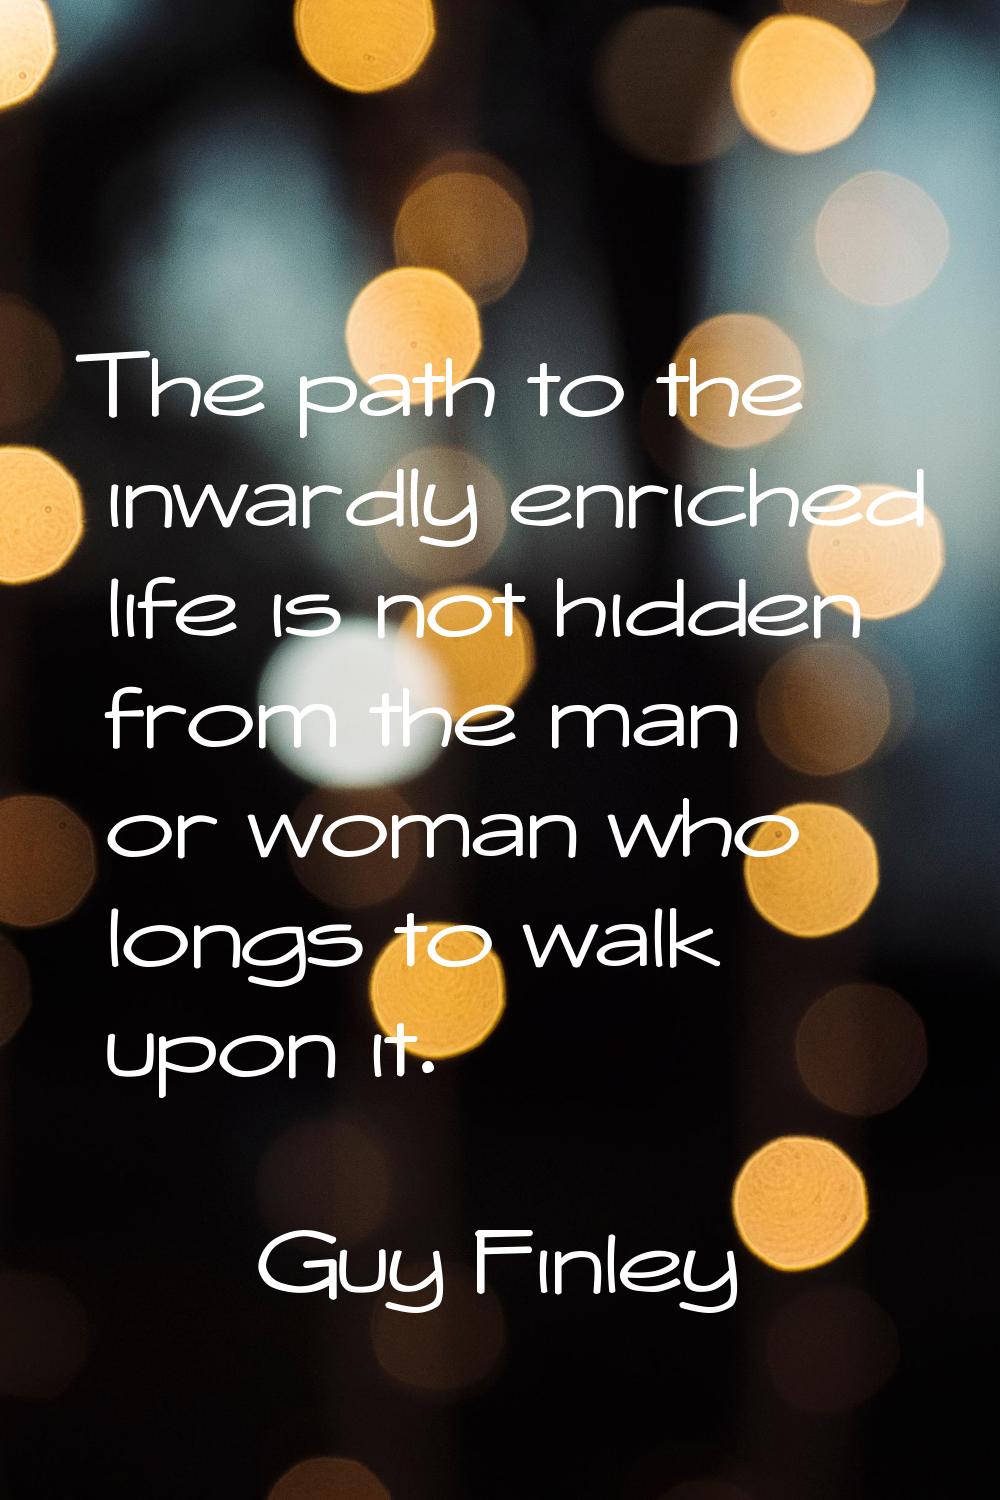 The path to the inwardly enriched life is not hidden from the man or woman who longs to walk upon i